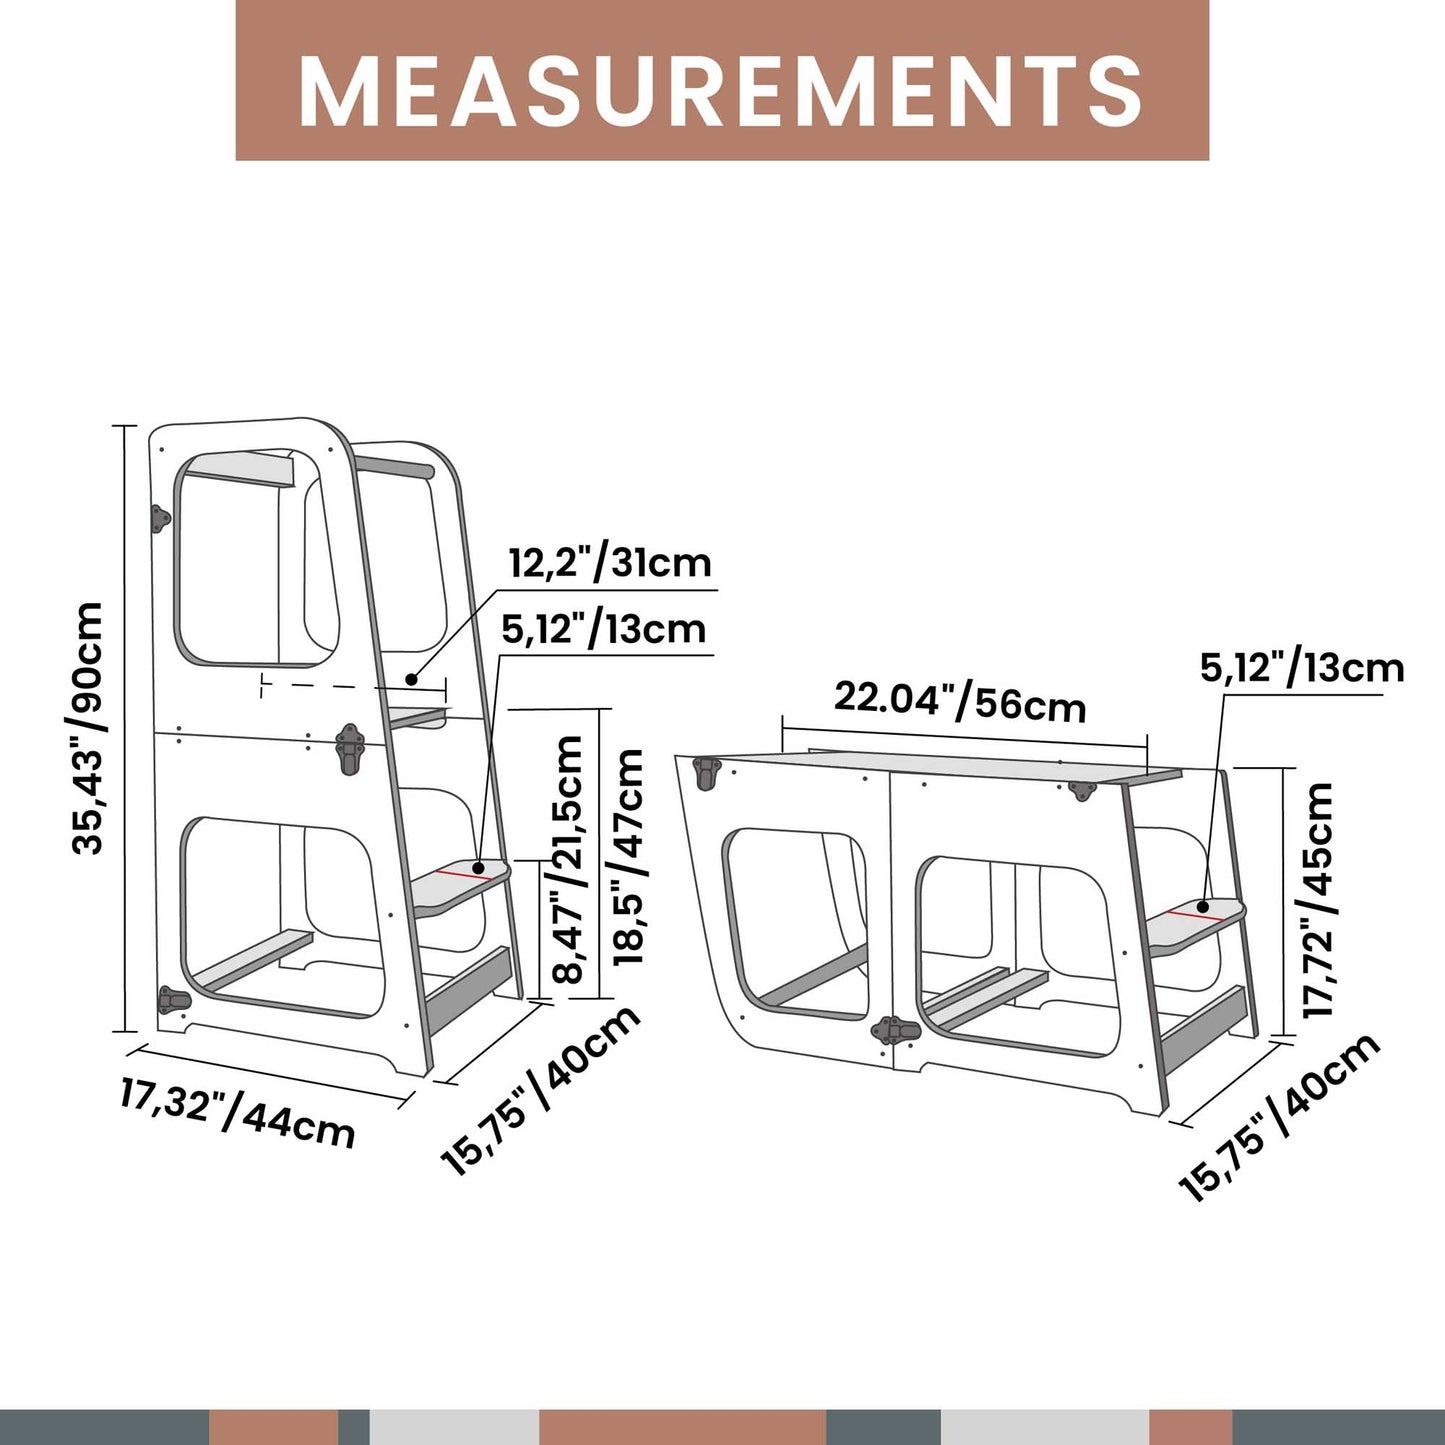 A diagram displaying the dimensions of a 2-in-1 Convertible kitchen tower - table and chair.